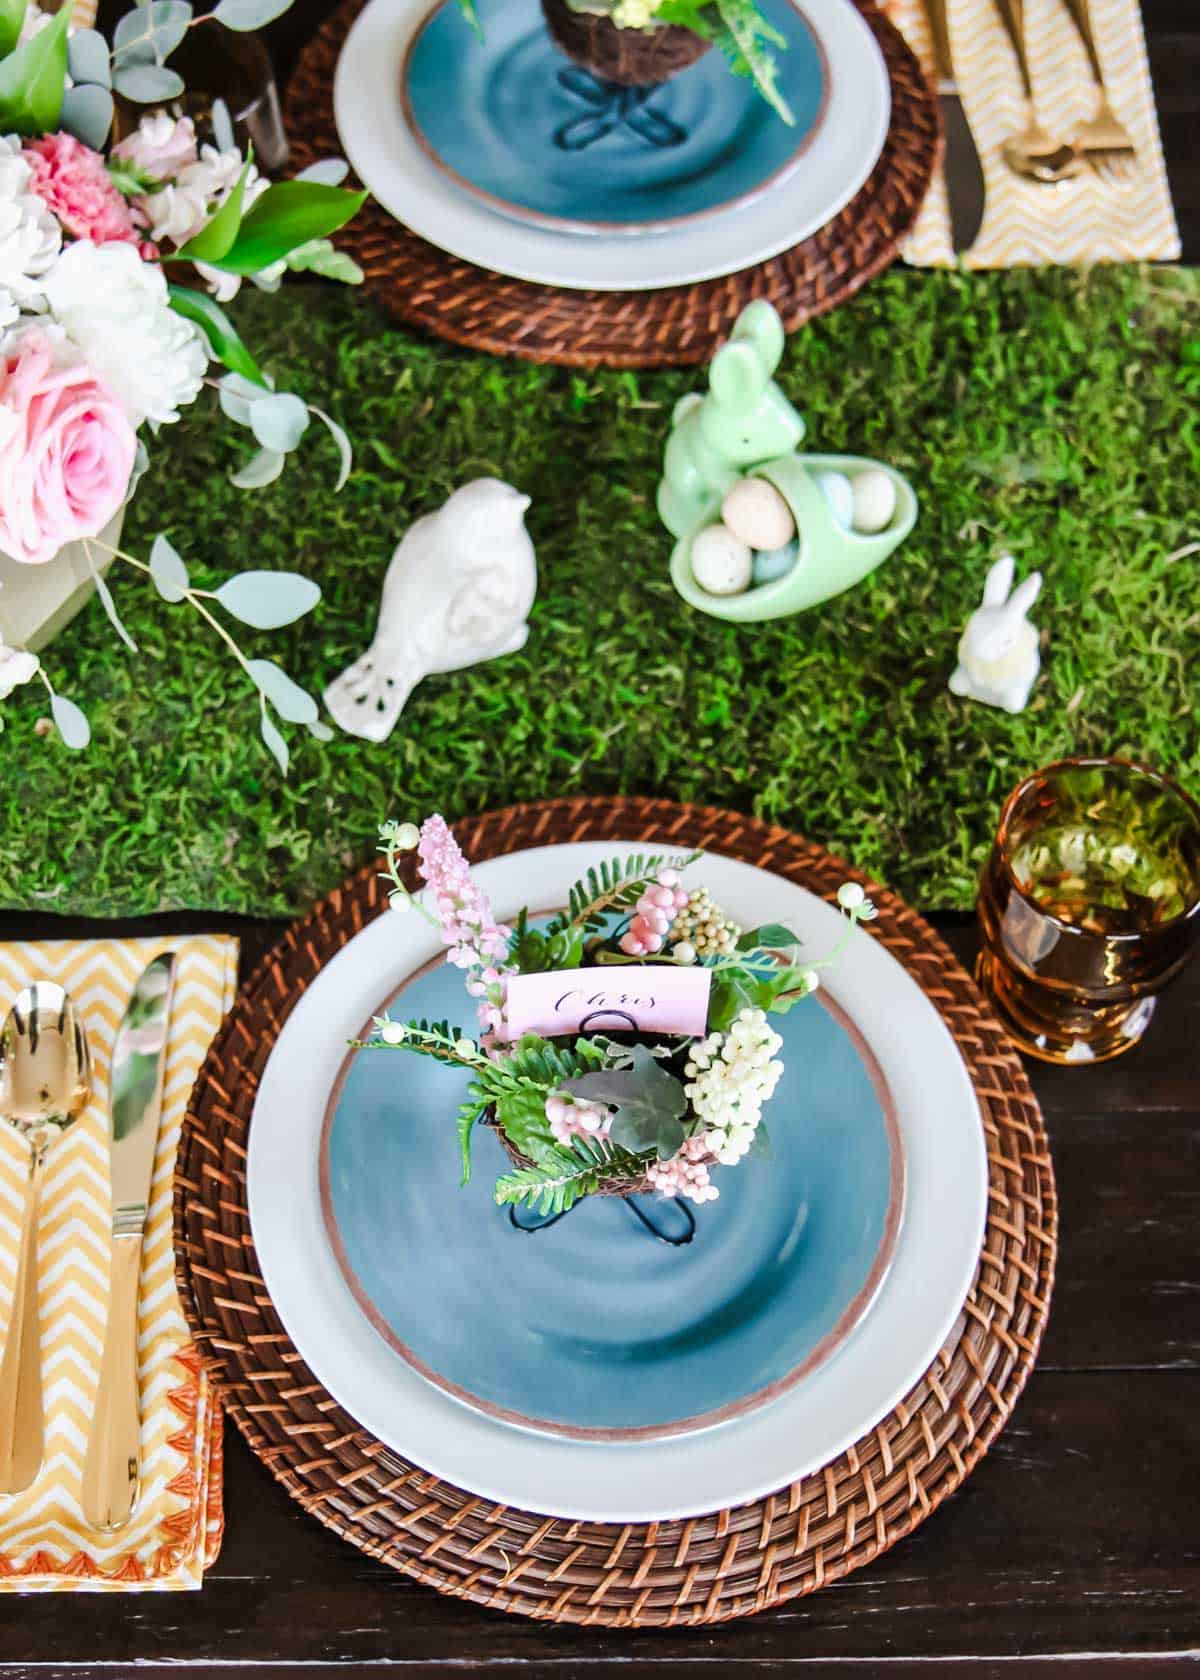 Easter tablescape with moss runner, white and blue dishes, rattan place mat, and bunny figurines.